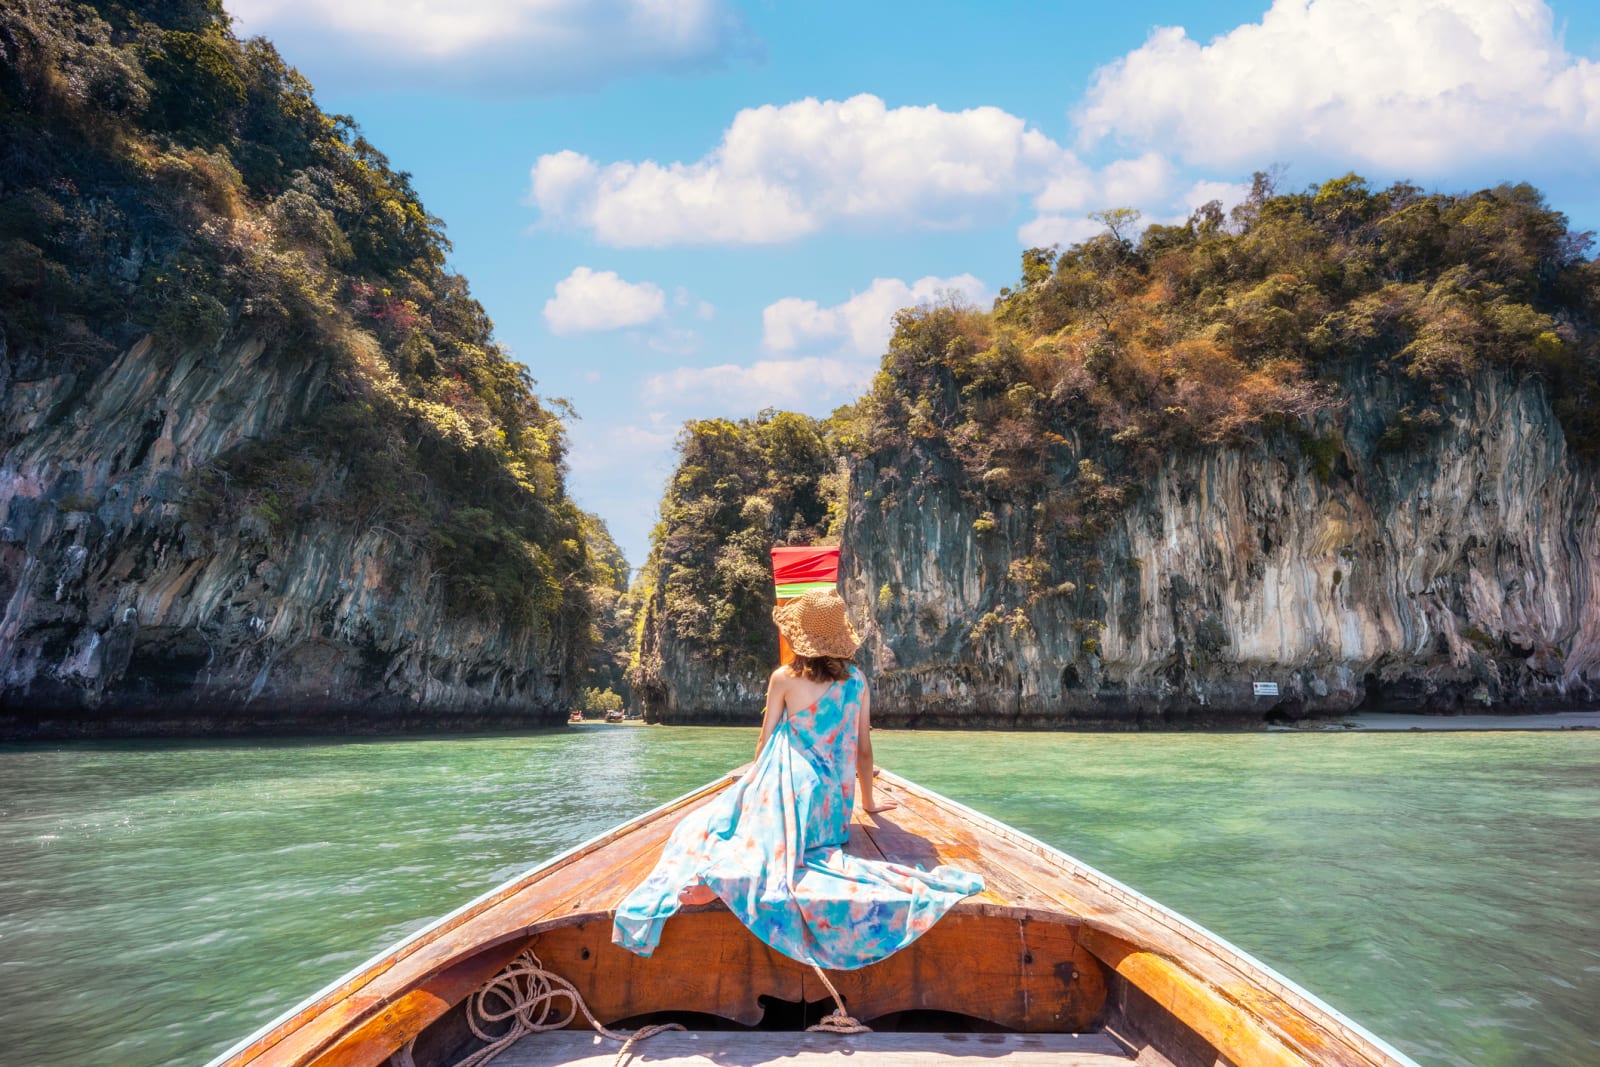 One tourist woman sitting on a longtail boat in Maya Bay, Phi Phi Islands, Thailand